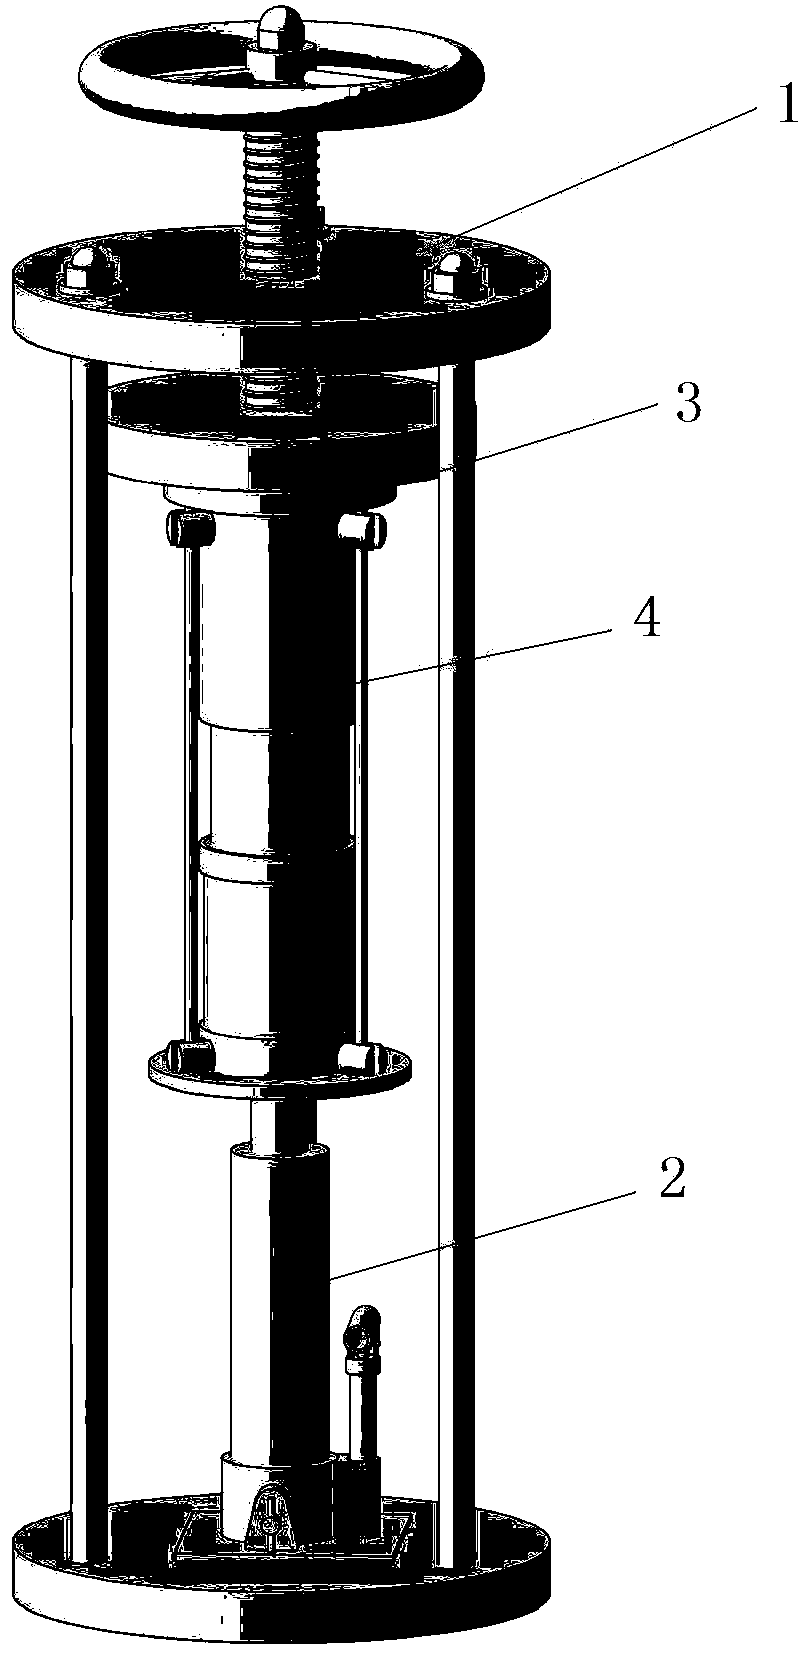 Density-controllable geotechnical triaxial sample preparation device